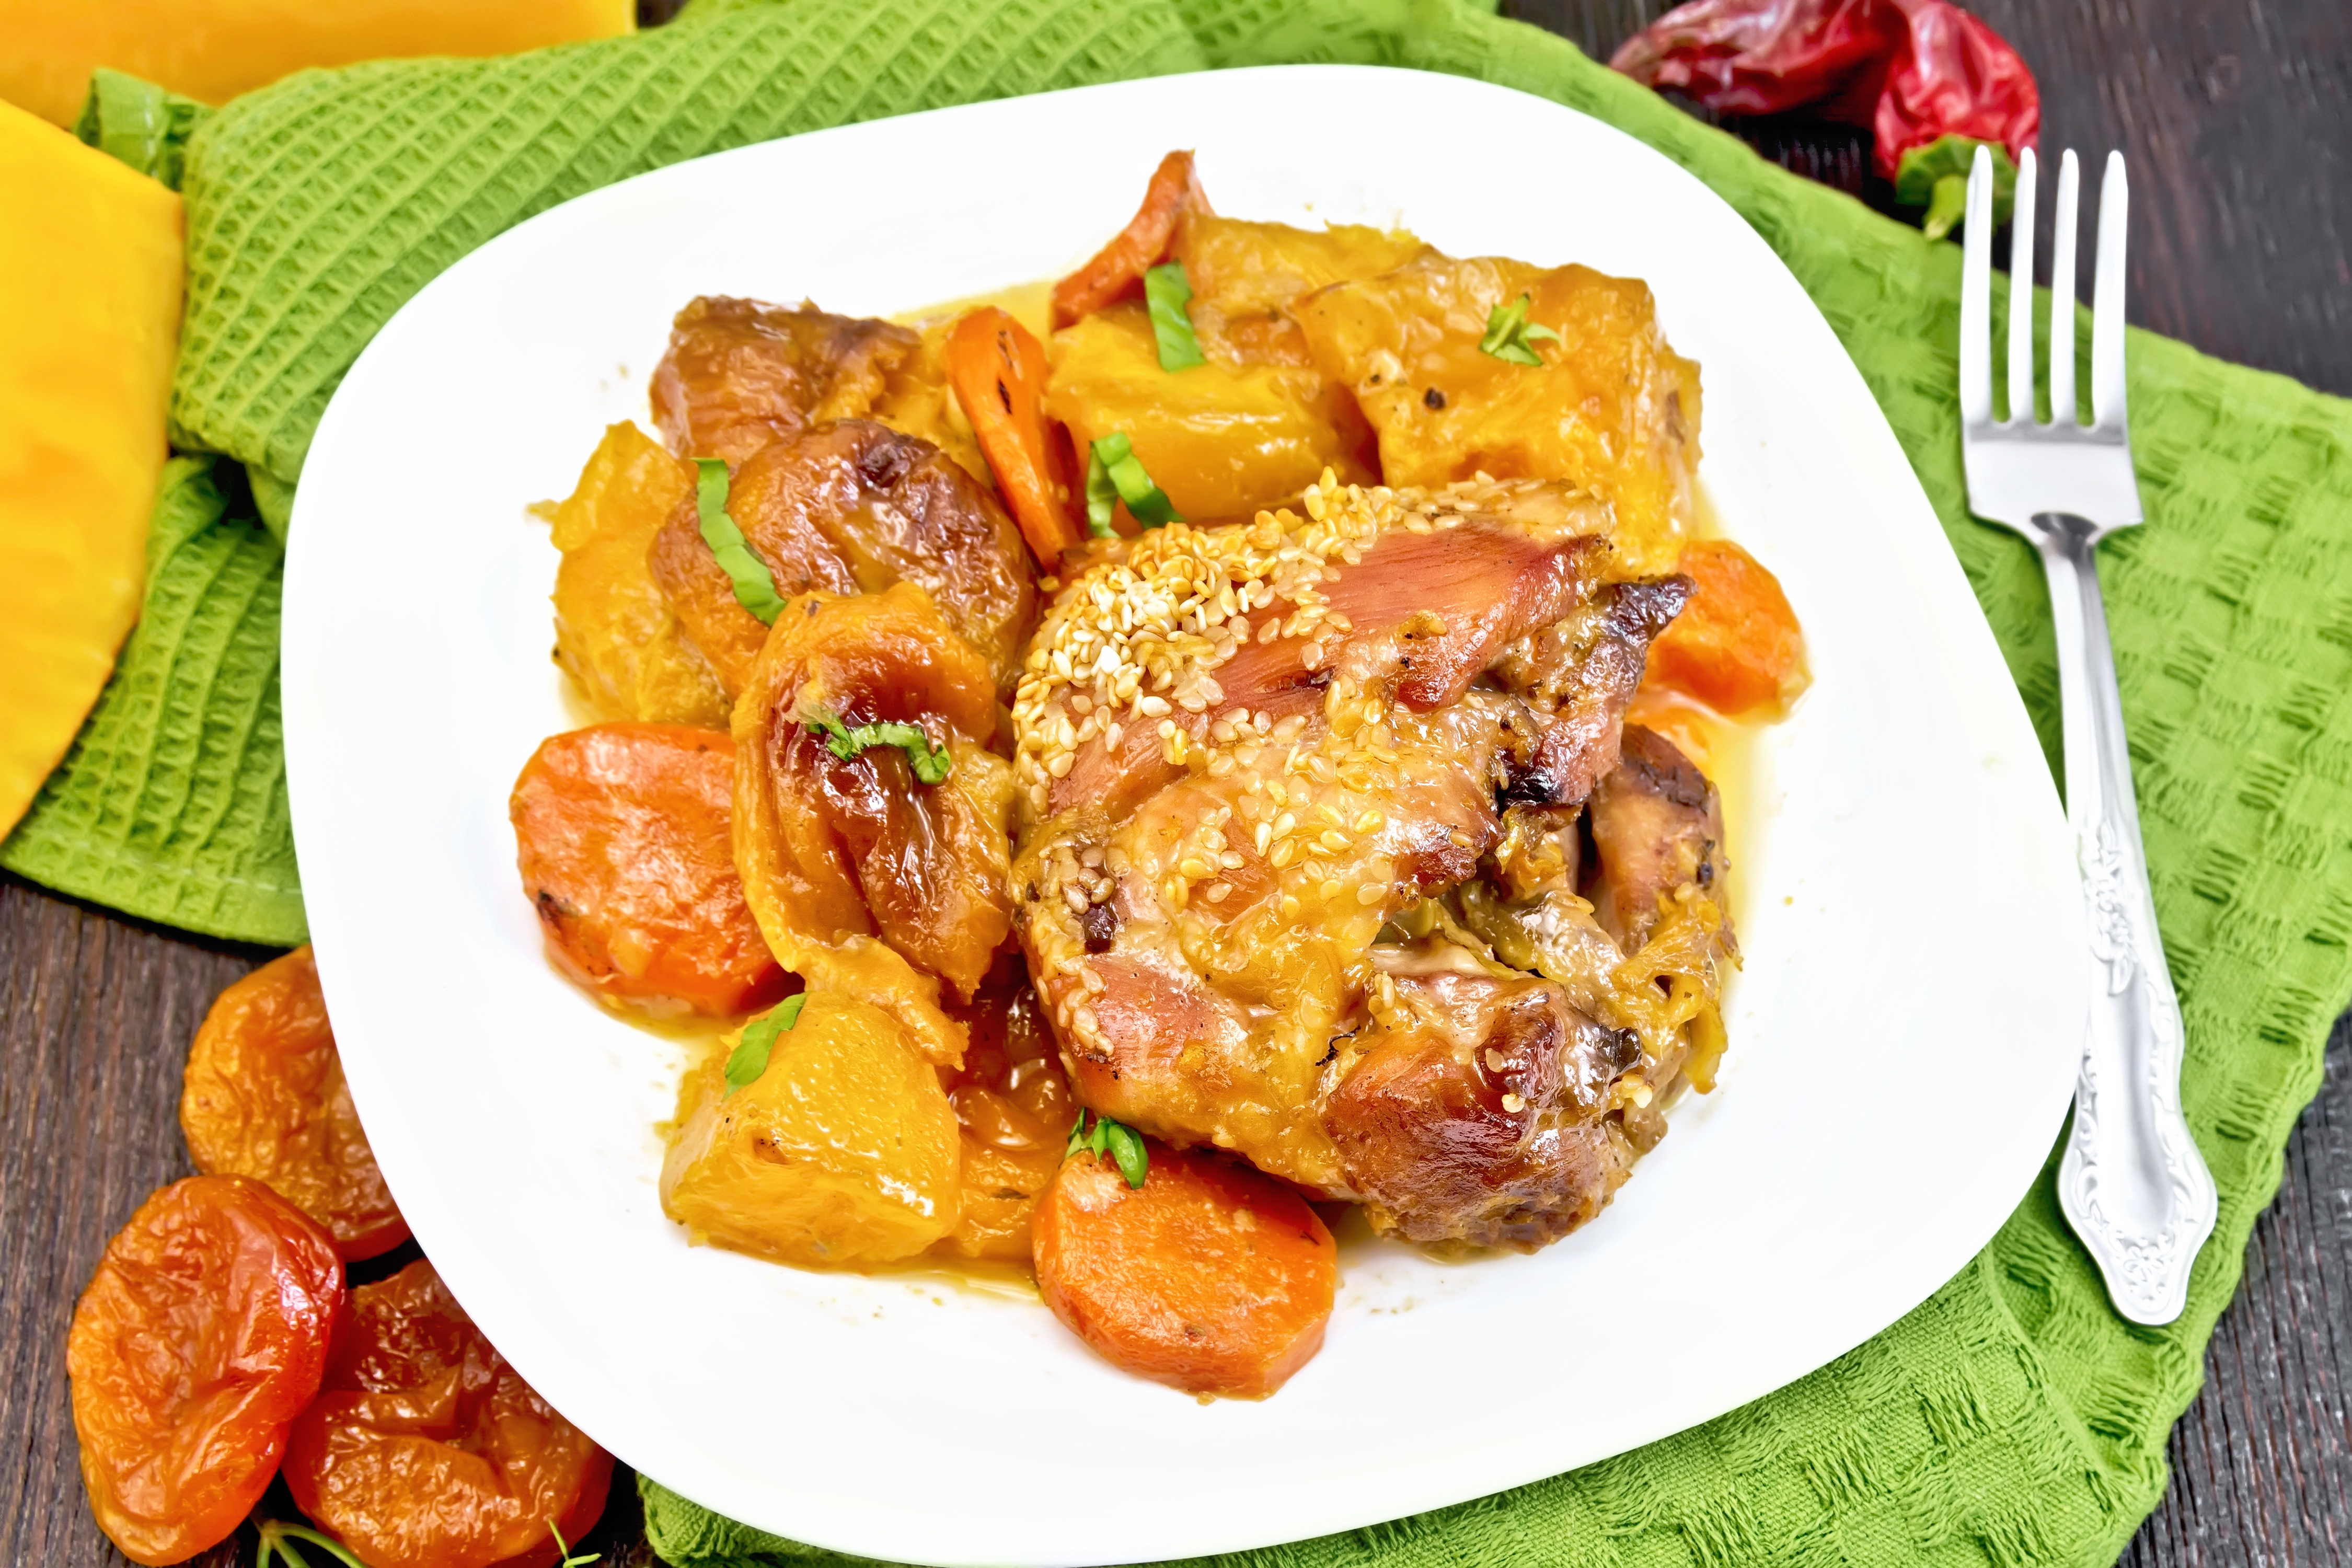 Chicken stew with pumpkin, dried apricots, carrots and red wine, sprinkled with sesame seeds in a plate on green napkin against dark wooden board